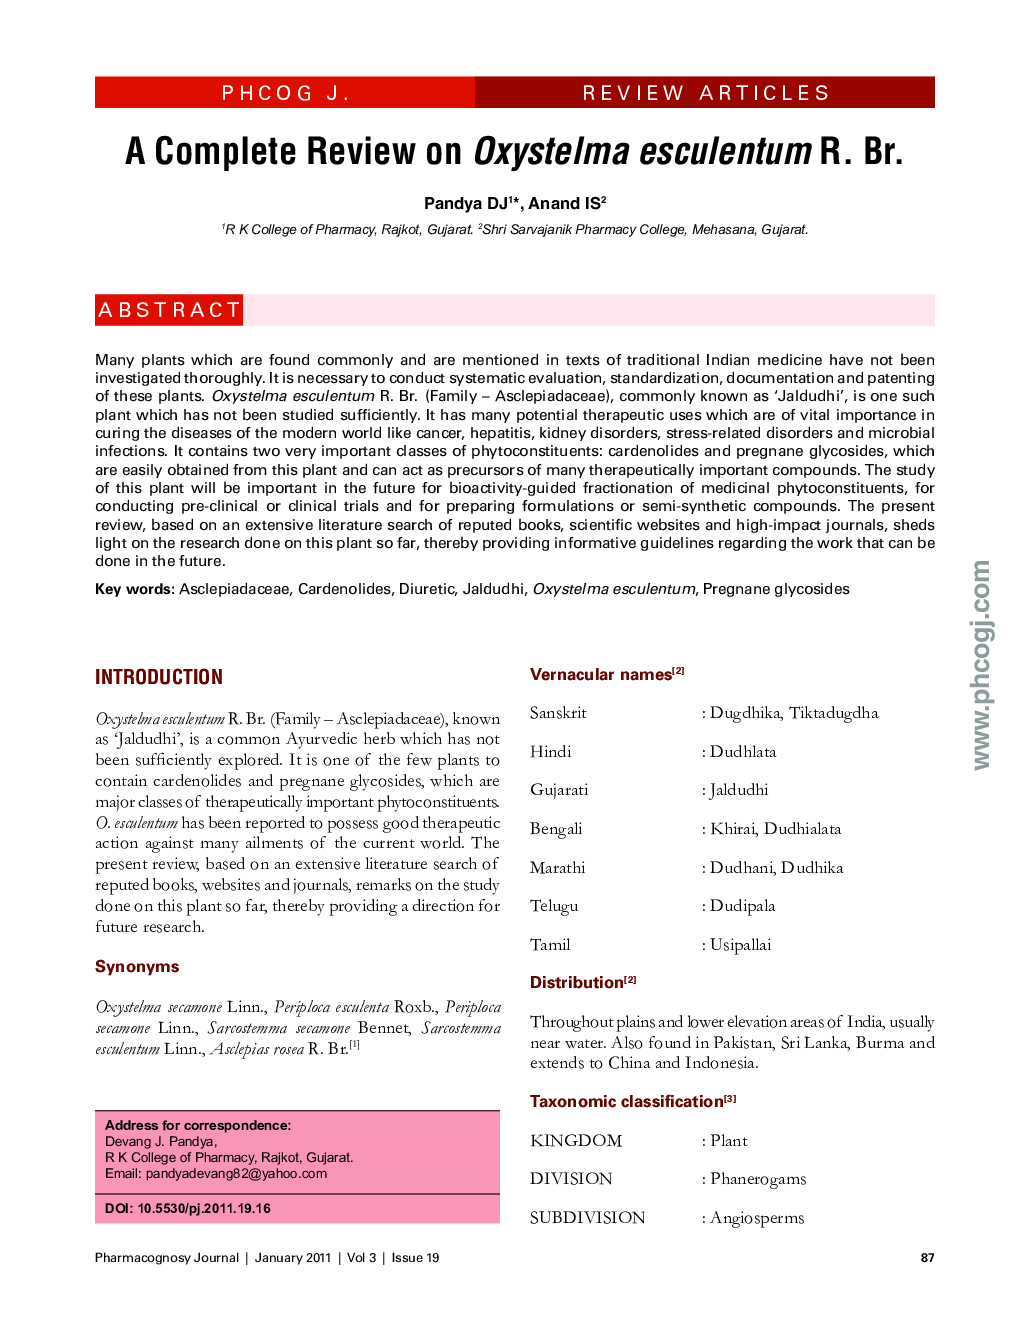 A Complete Review on Oxystelma esculentum R. Br.